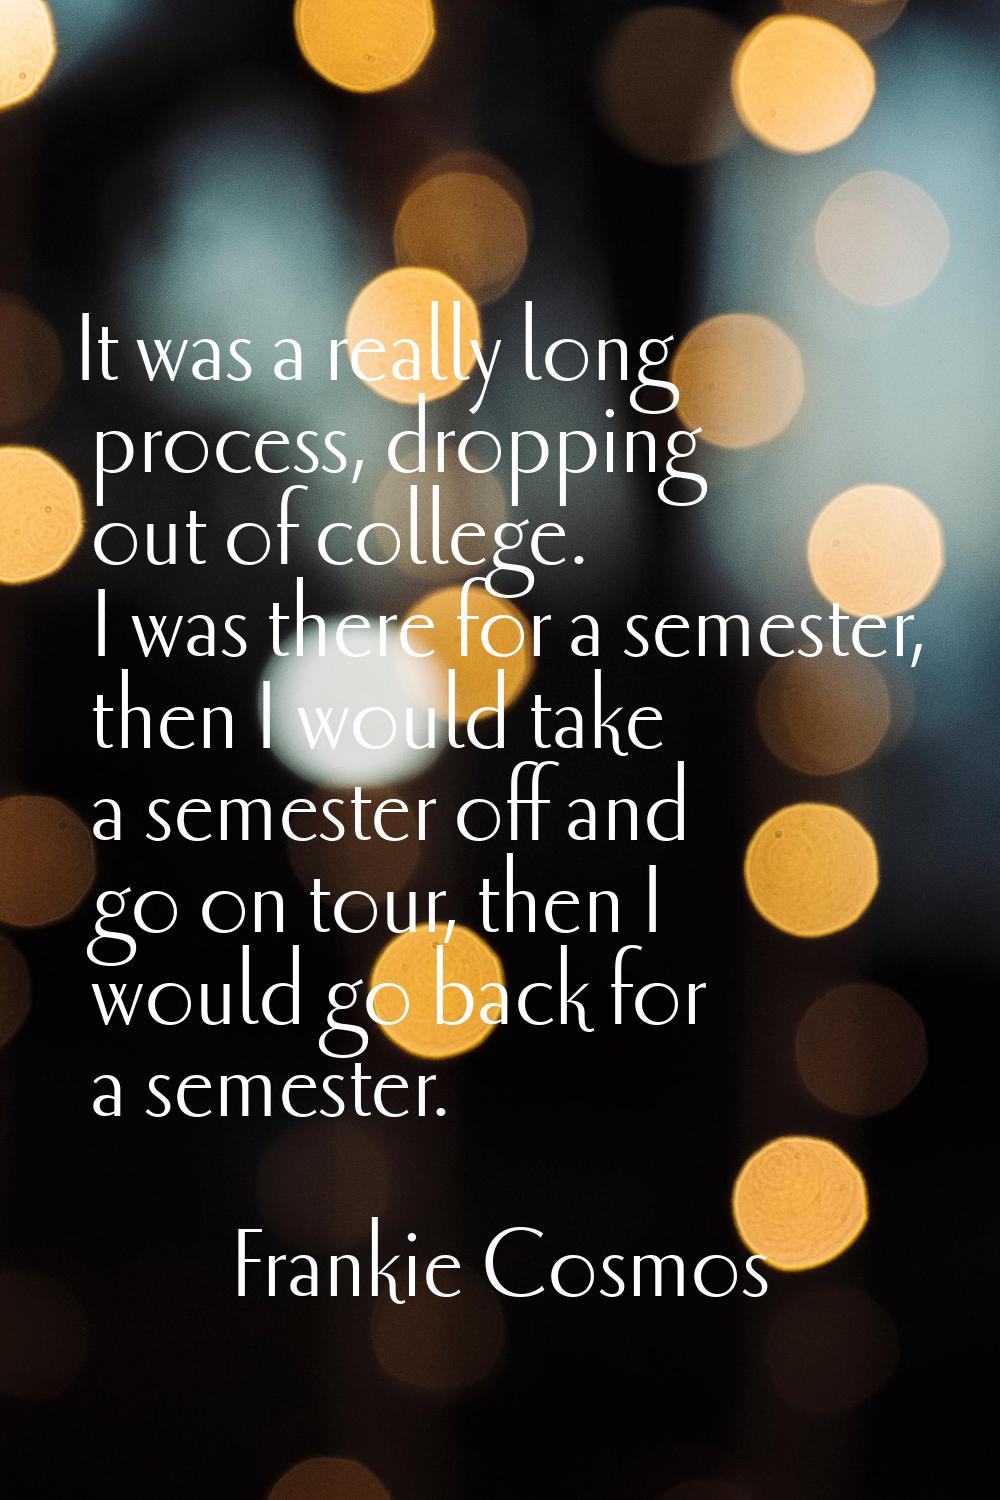 It was a really long process, dropping out of college. I was there for a semester, then I would tak